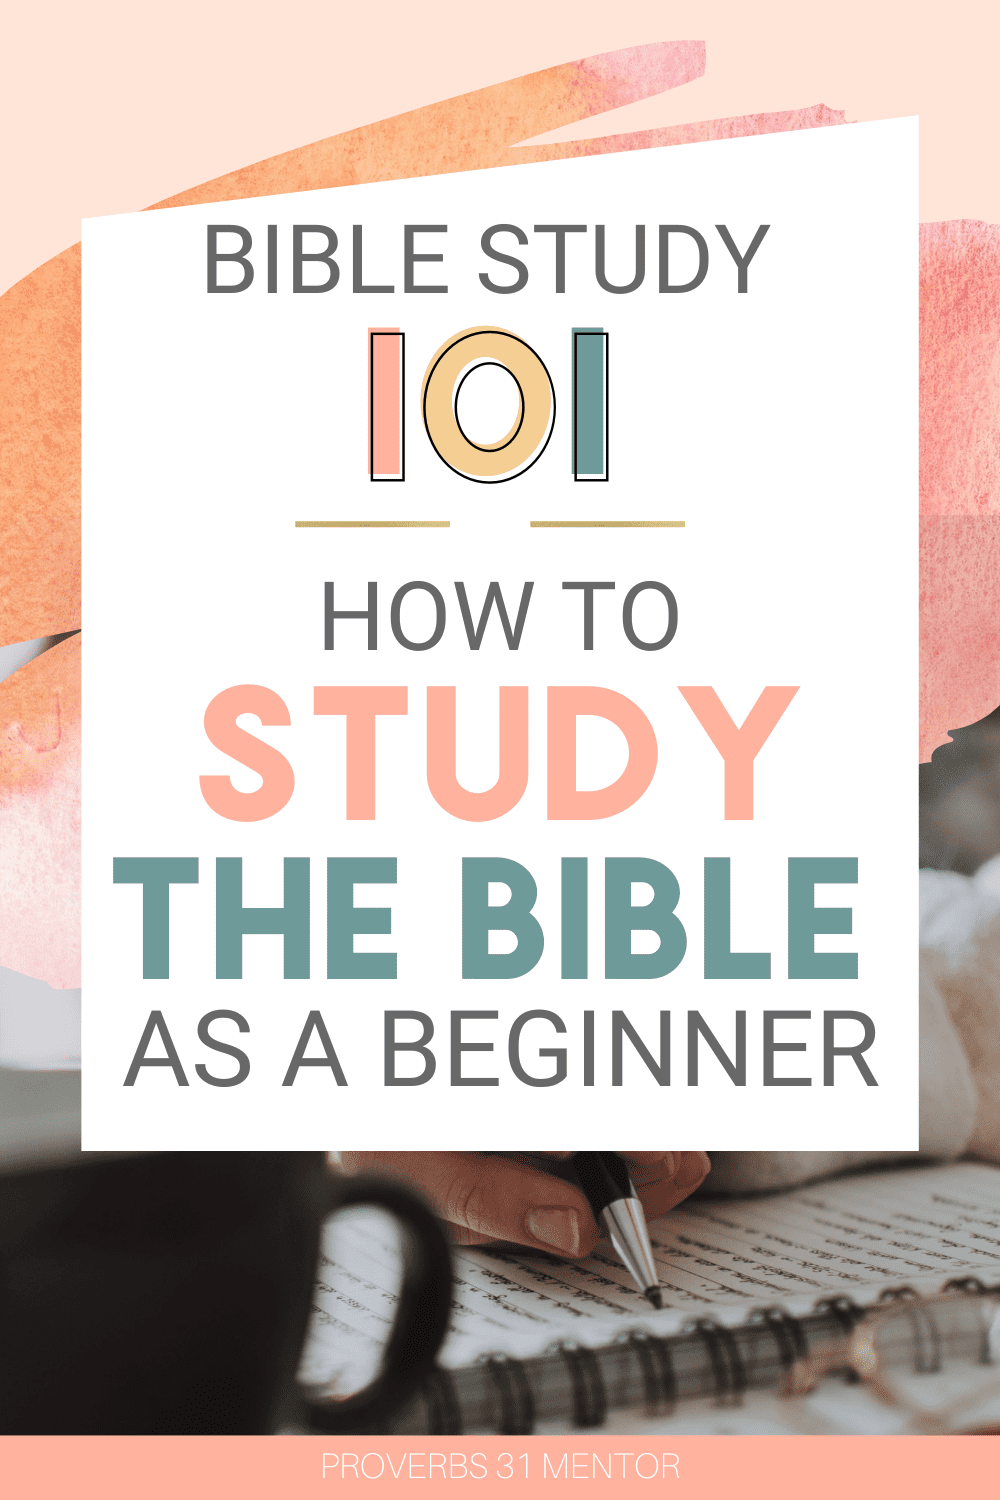 Title- Bible study 101: How to study the Bible as a beginner 